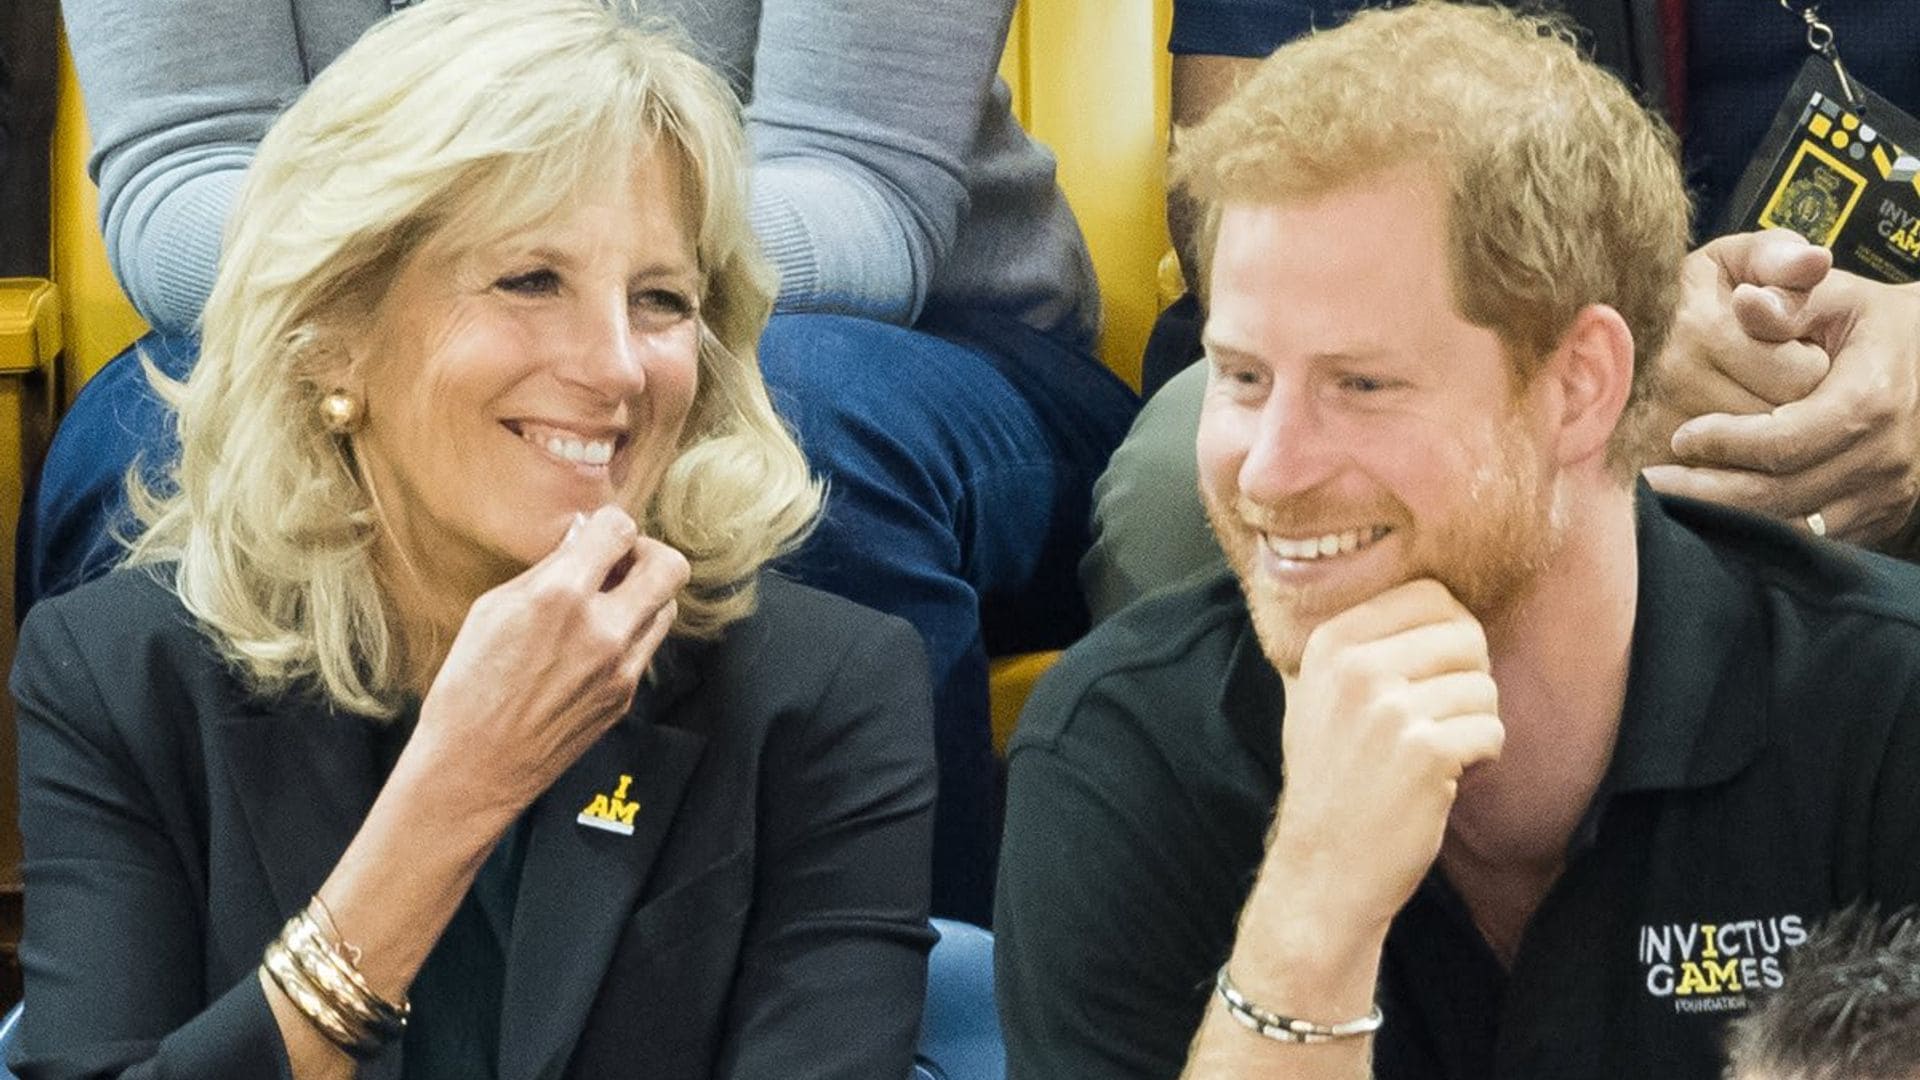 First Lady Dr. Jill Biden and Prince Harry teamed up for a special reason